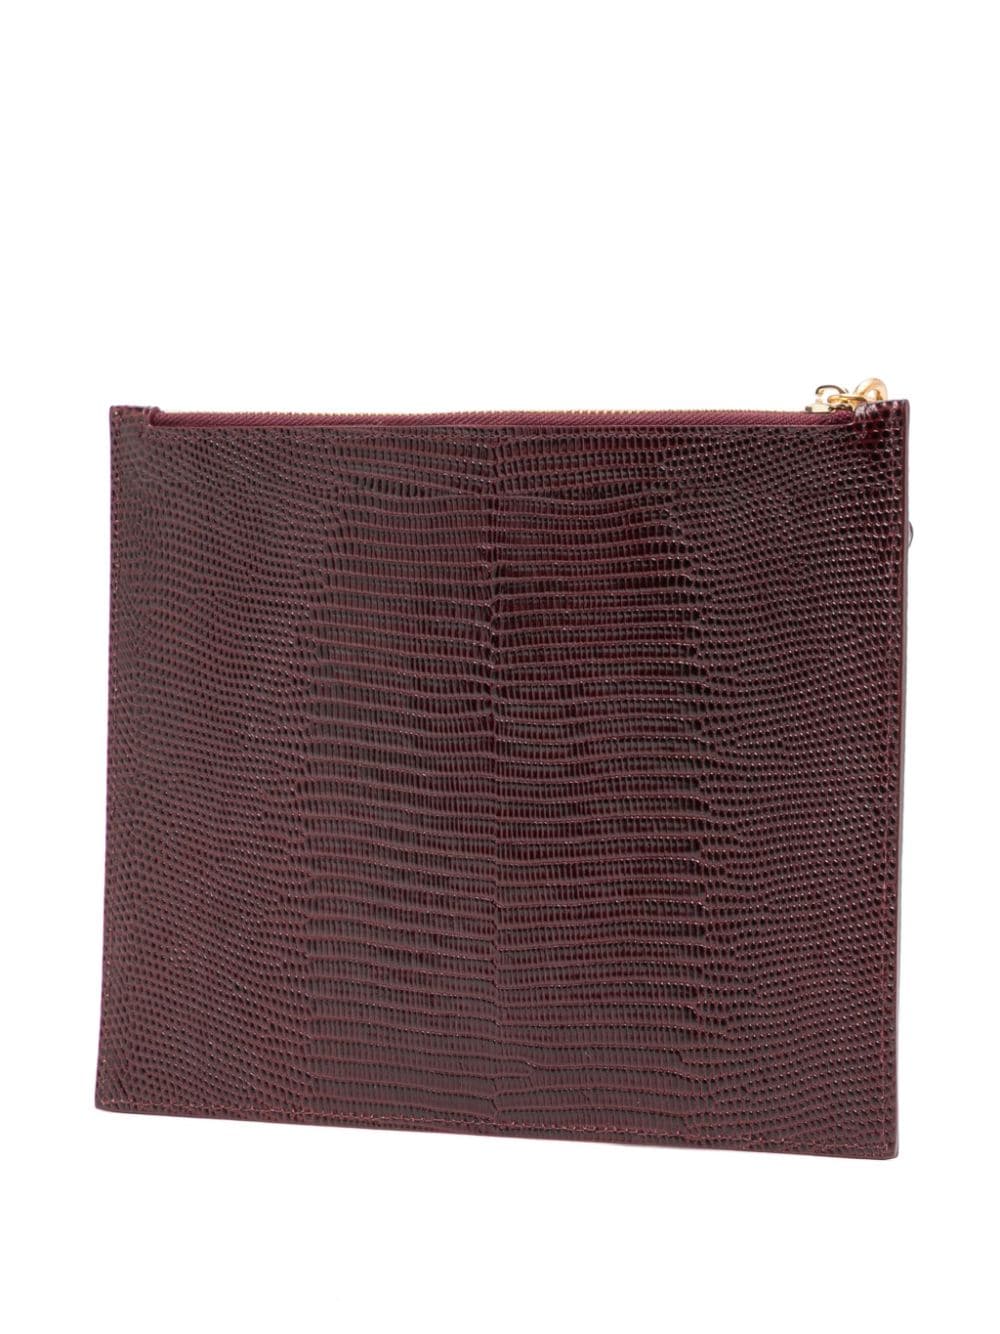 Shop Tammy & Benjamin Lane Leather Clutch Bag In Red